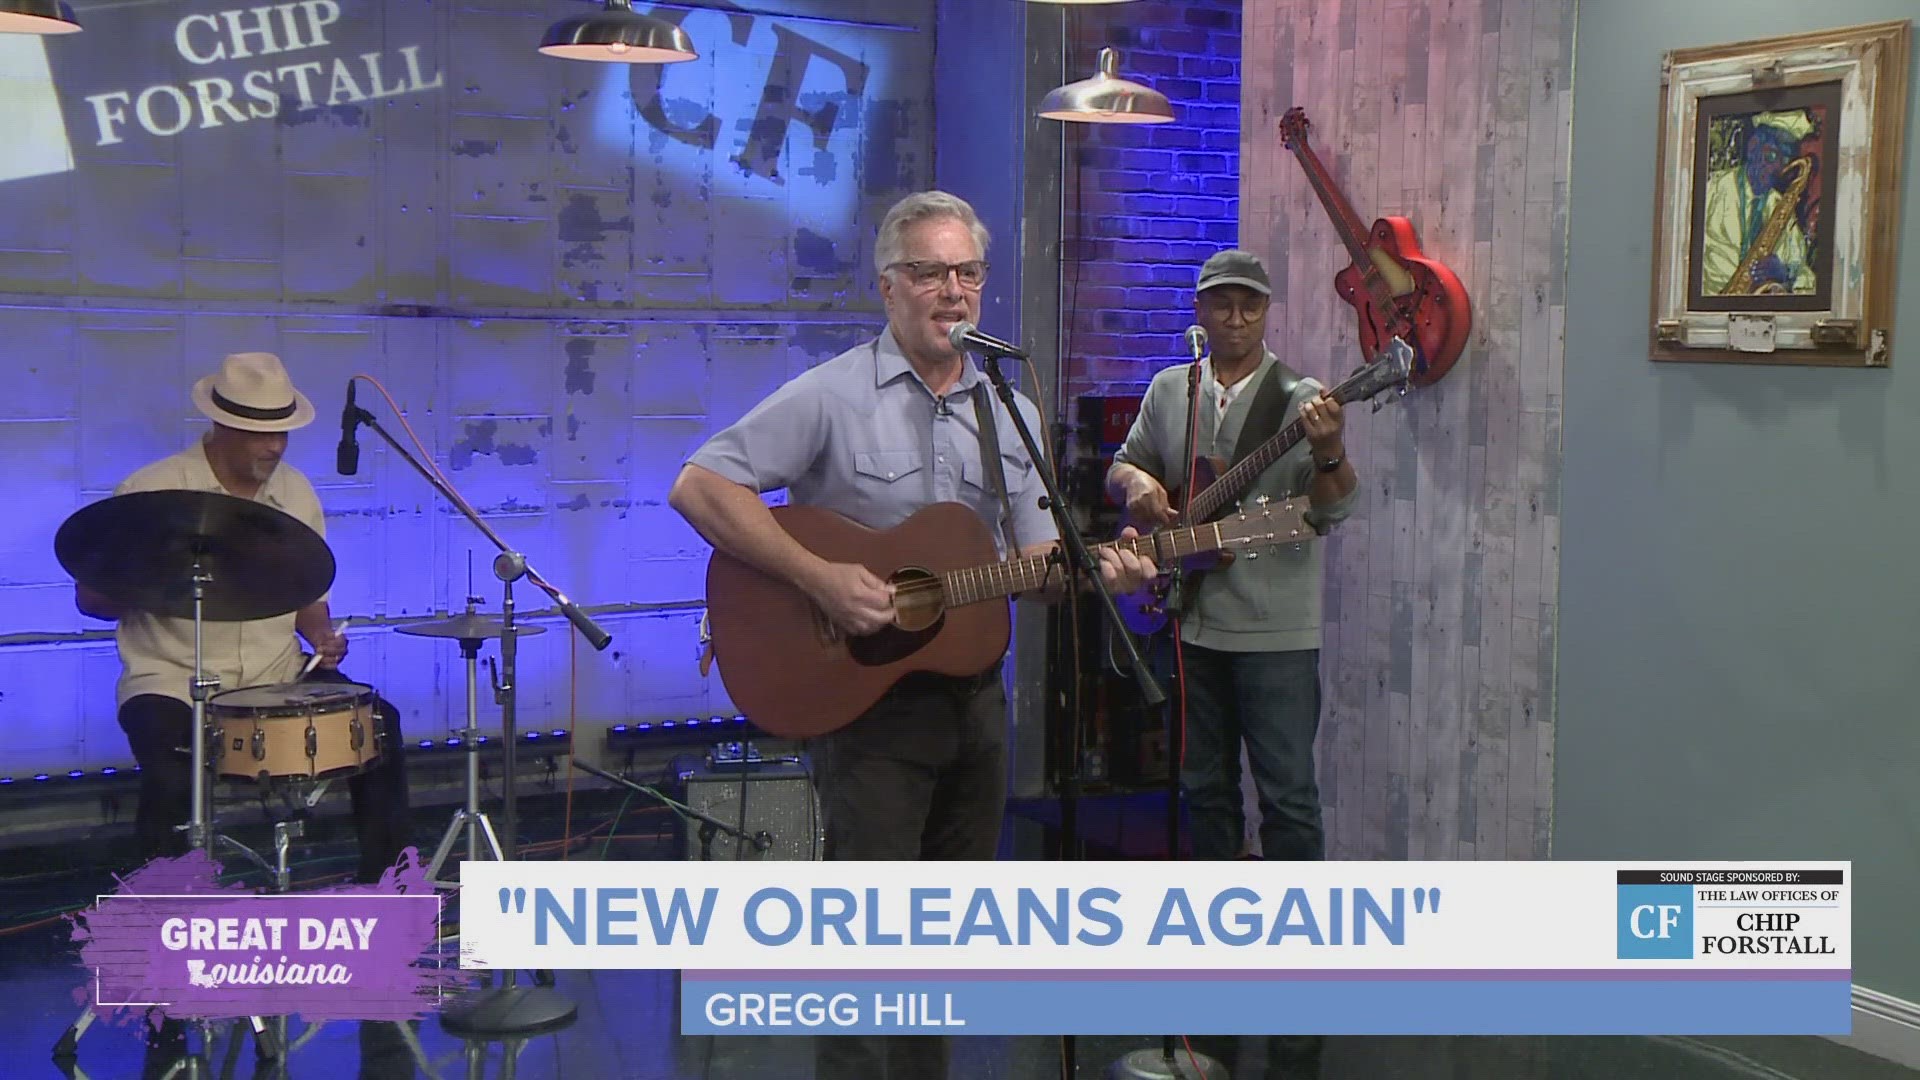 Gregg Hill shares another song from his new album and introduces us to his band.